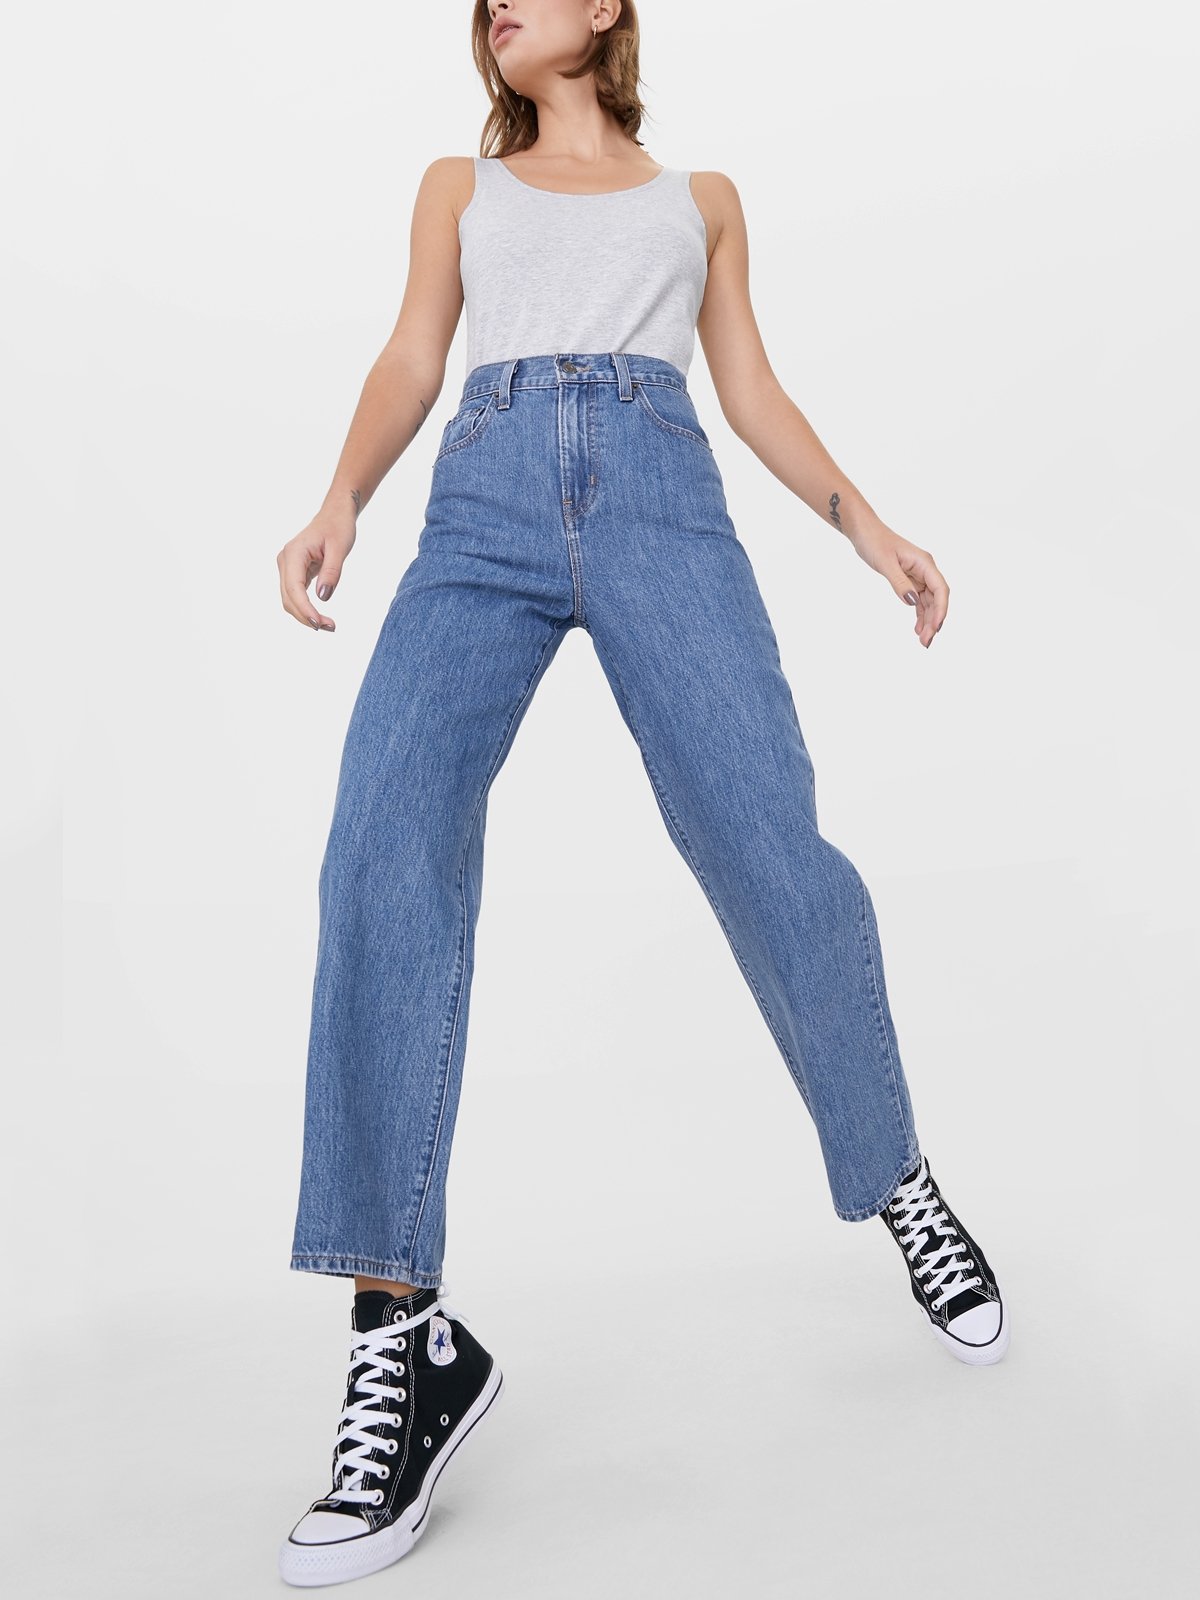 Ribcage Straight Ankle Jeans - Noe Dark Mineral - Pomelo Fashion